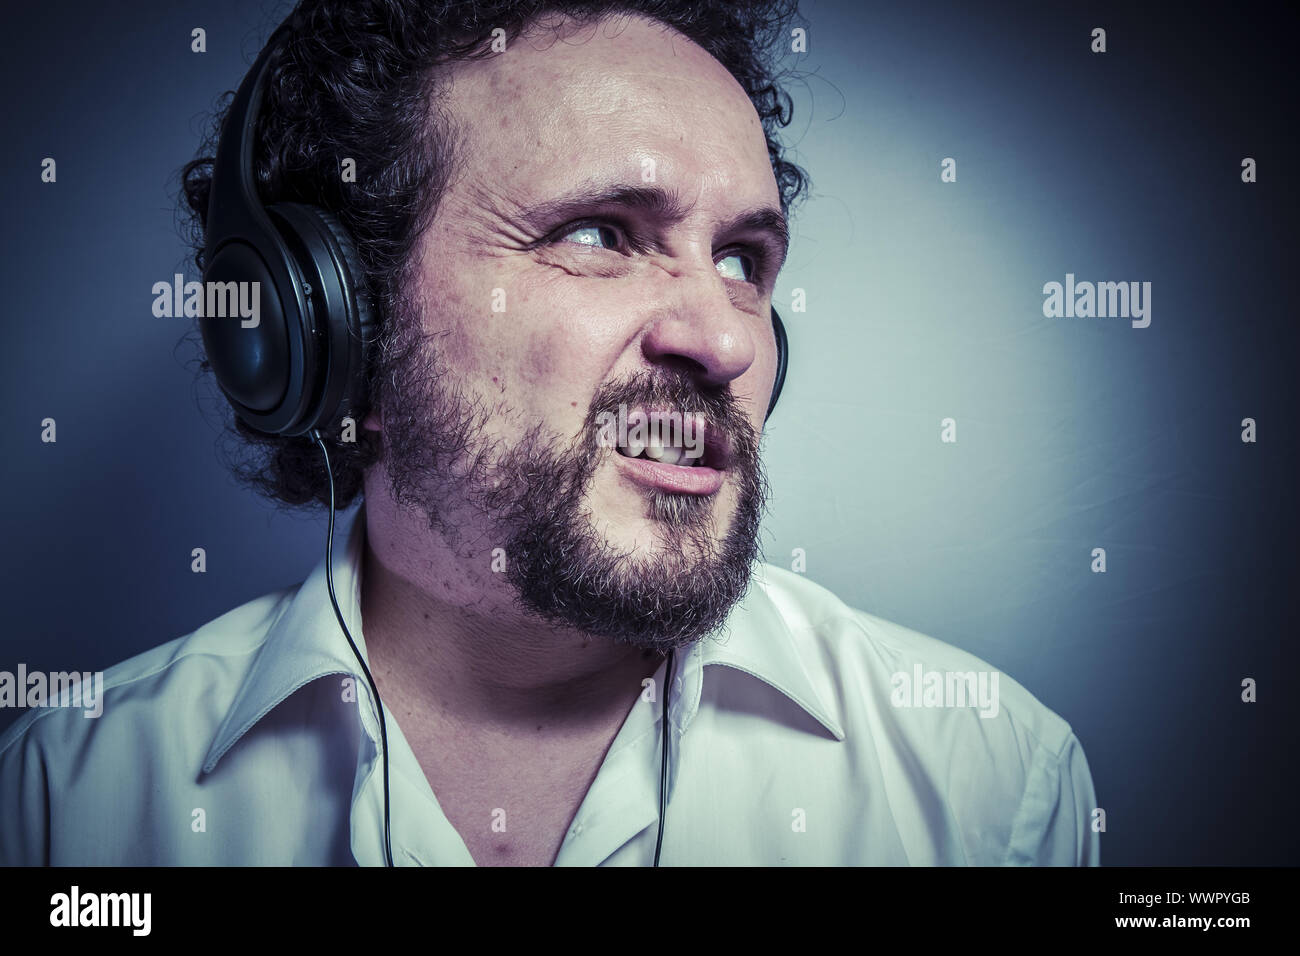 hate music, man with intense expression, white shirt Stock Photo